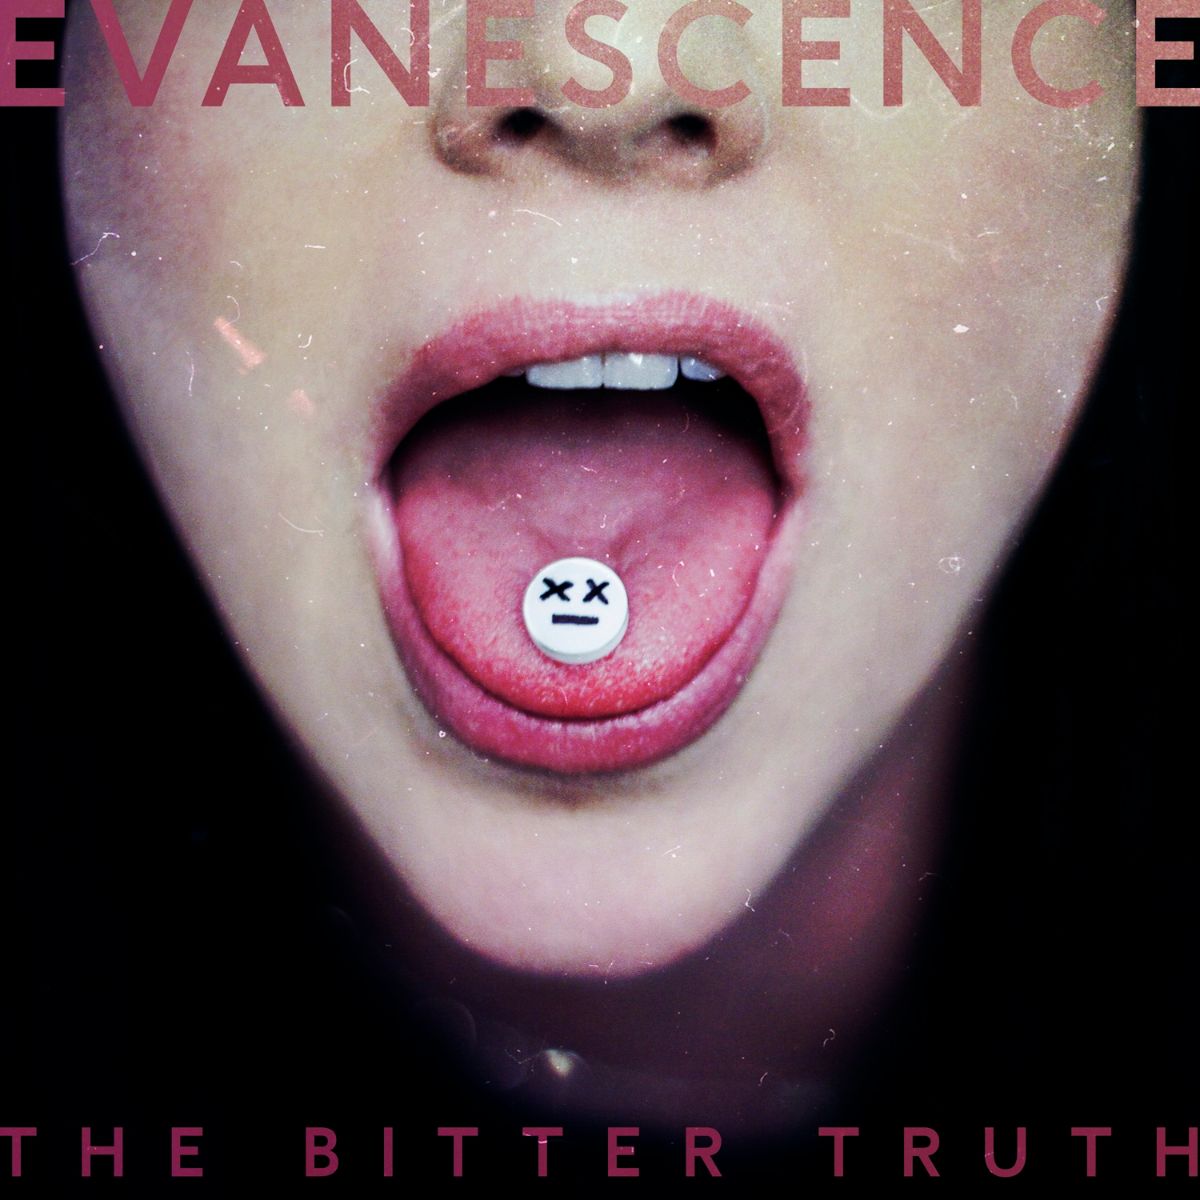 Evanescence’s ‘The Bitter Truth’ is a bittersweet return from hiatus